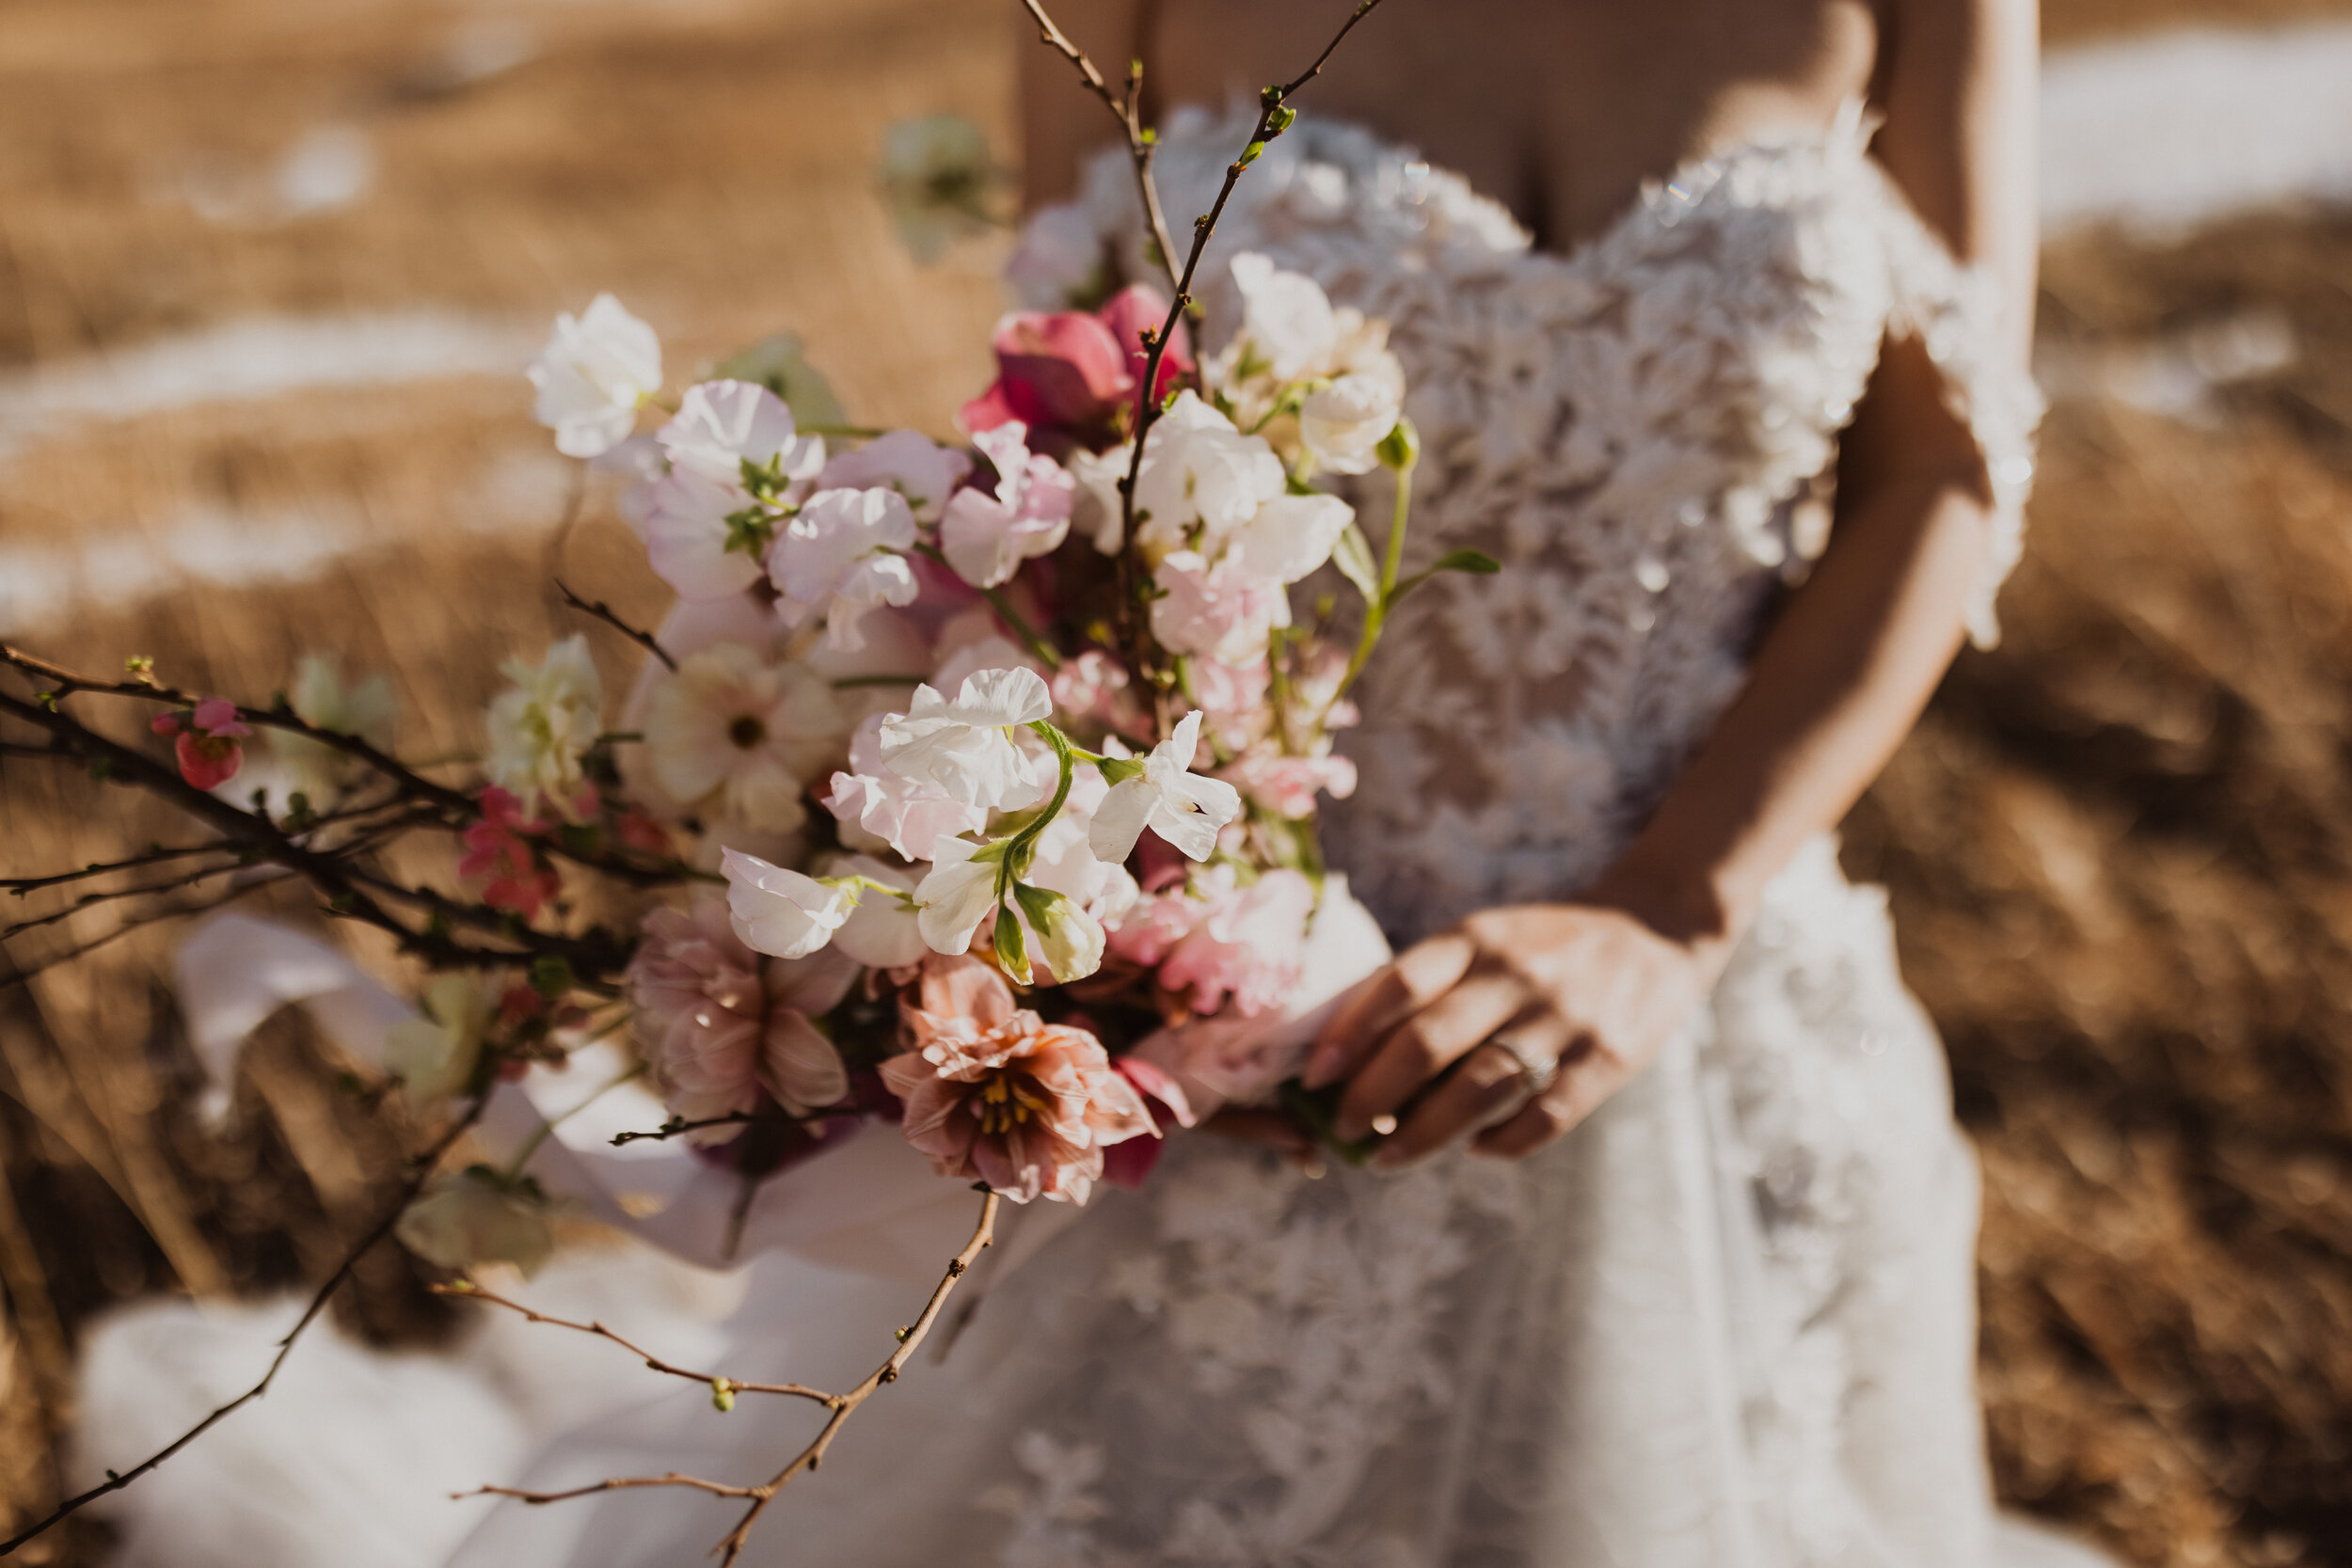  Colorado mountaintop styled elopement in Dany Tabet Flora wedding dress 